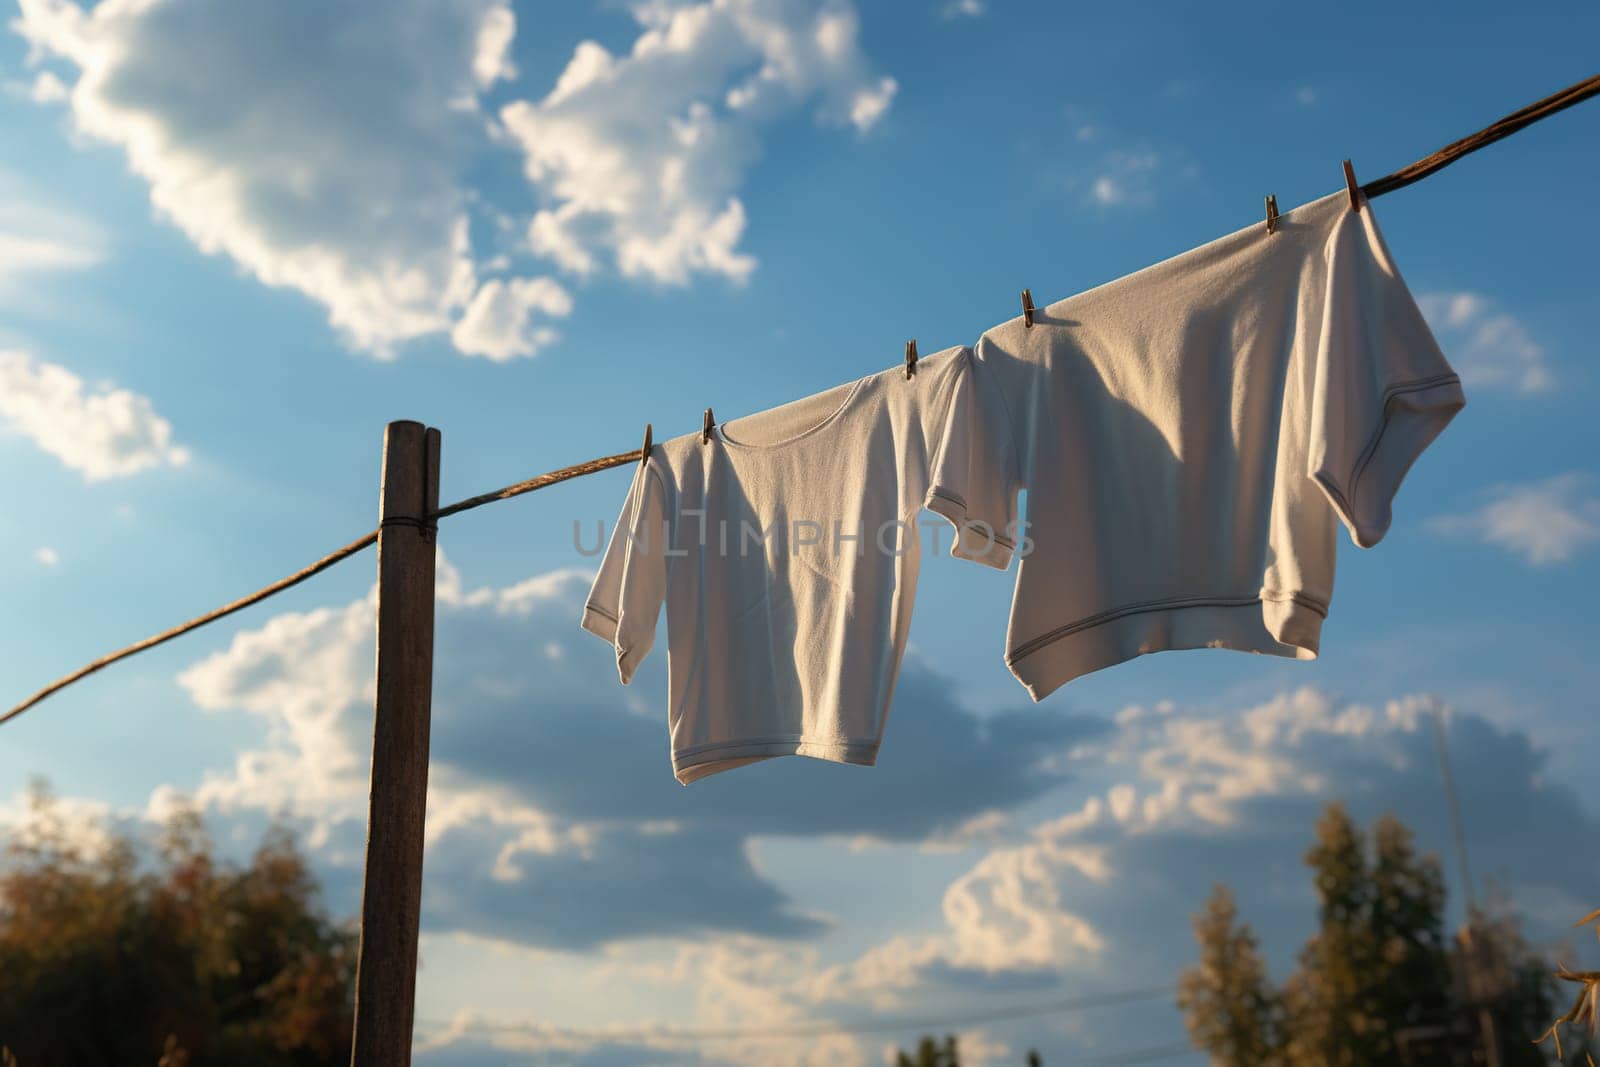 Clothes drying on a wire in the sun